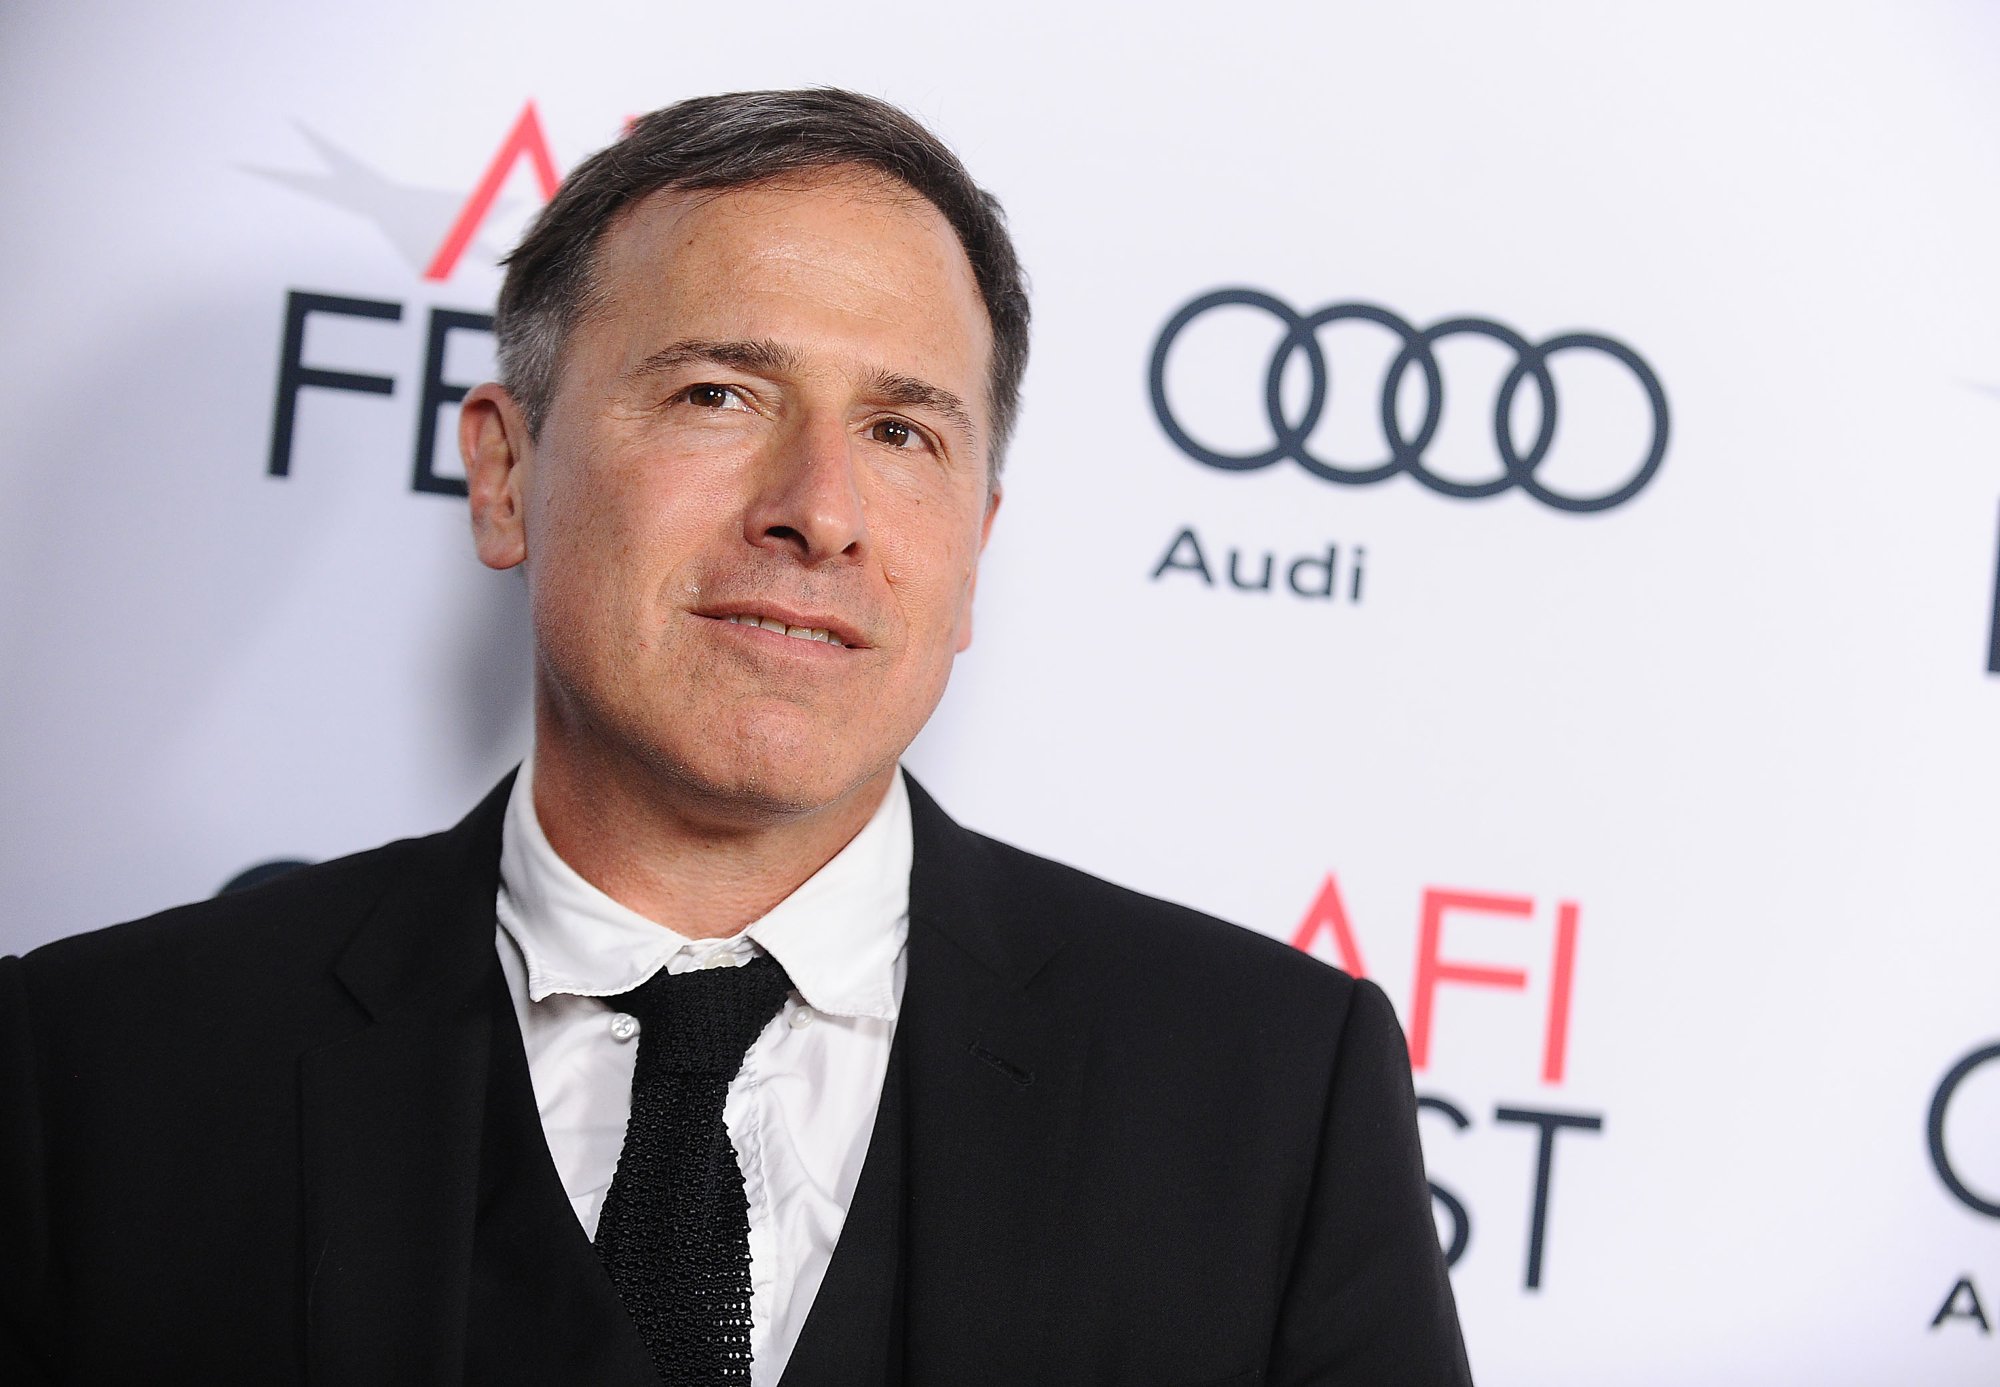 'Amsterdam' filmmaker David O. Russell wearing a suit with a slight smile in front of AFI Fest step and repeat